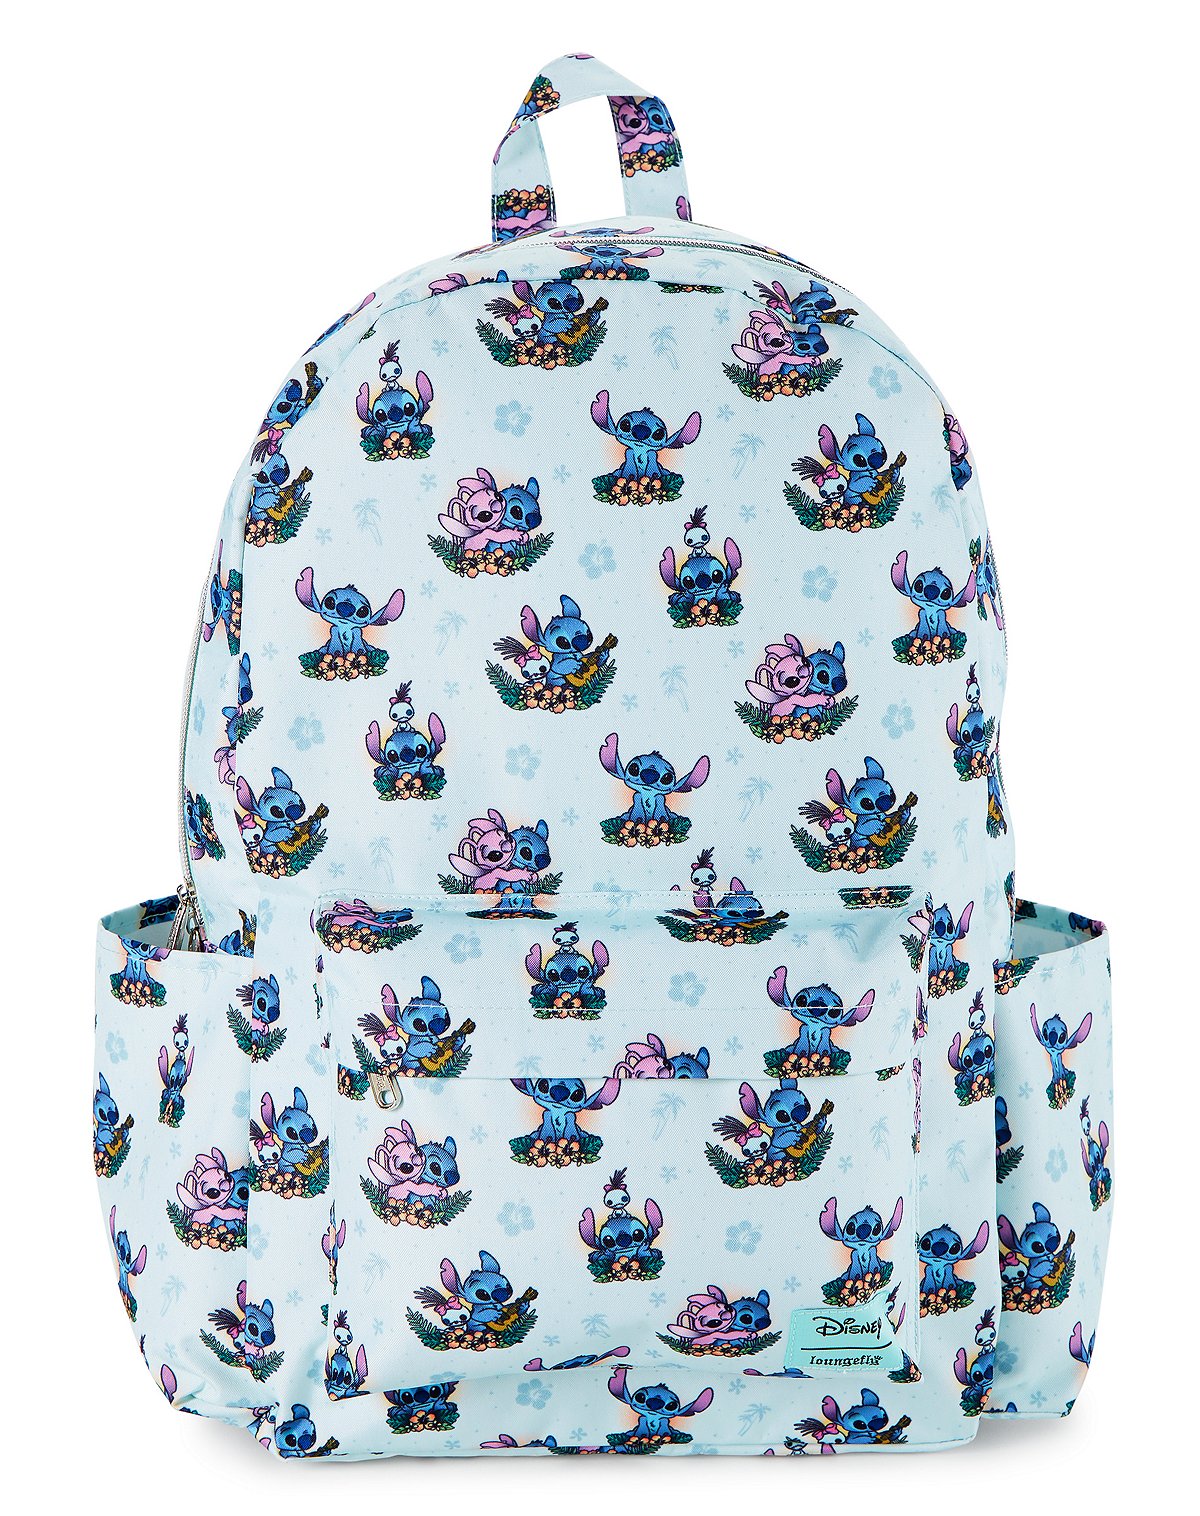 Loungefly Tropical Stitch Backpack